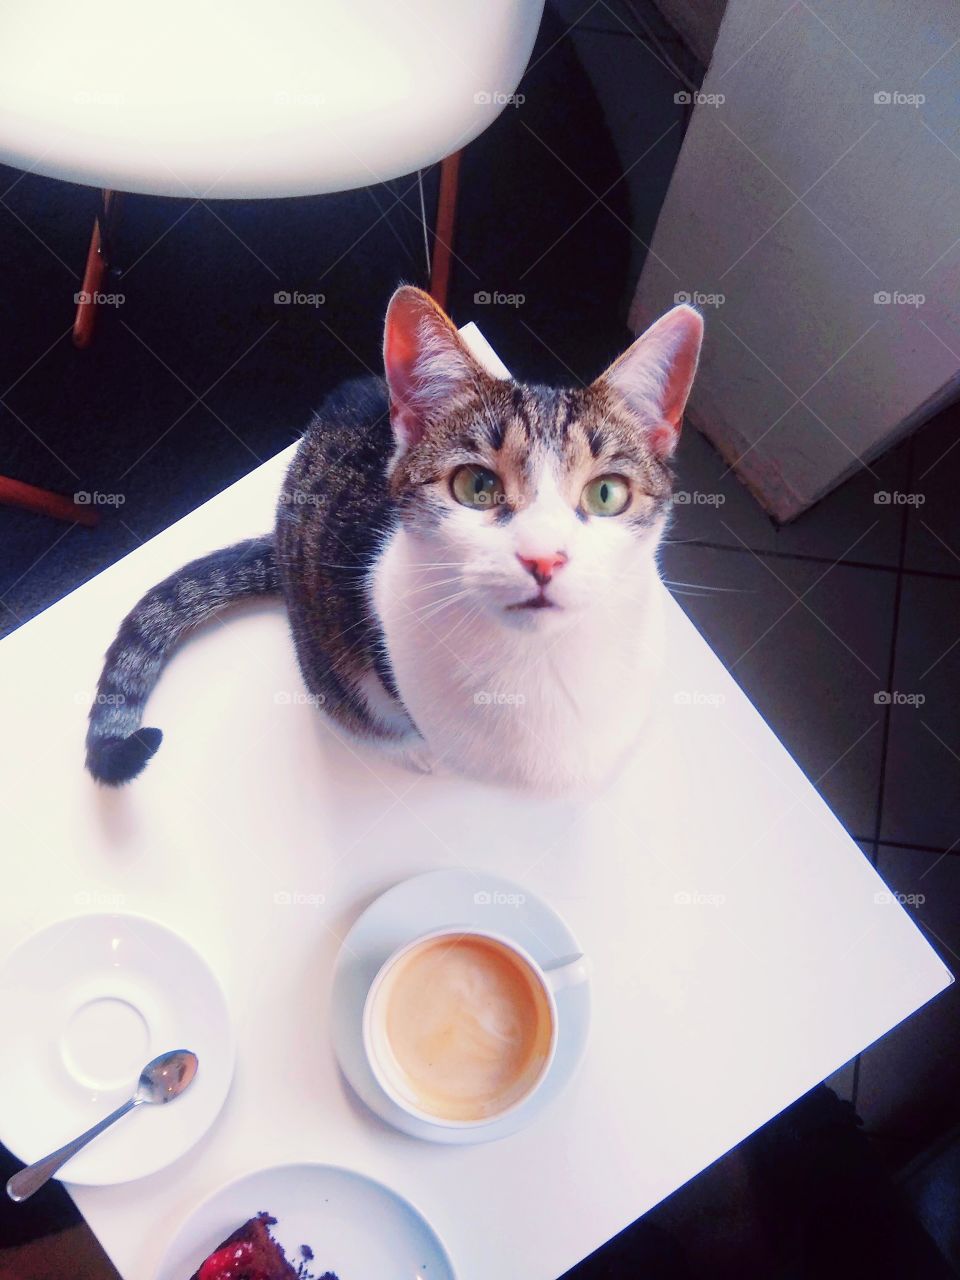 Want some coffee? Drink it with the cat companion - the taste will be even better! Starring Dyzio from the cat cafe Koton (Wrocław, Poland)